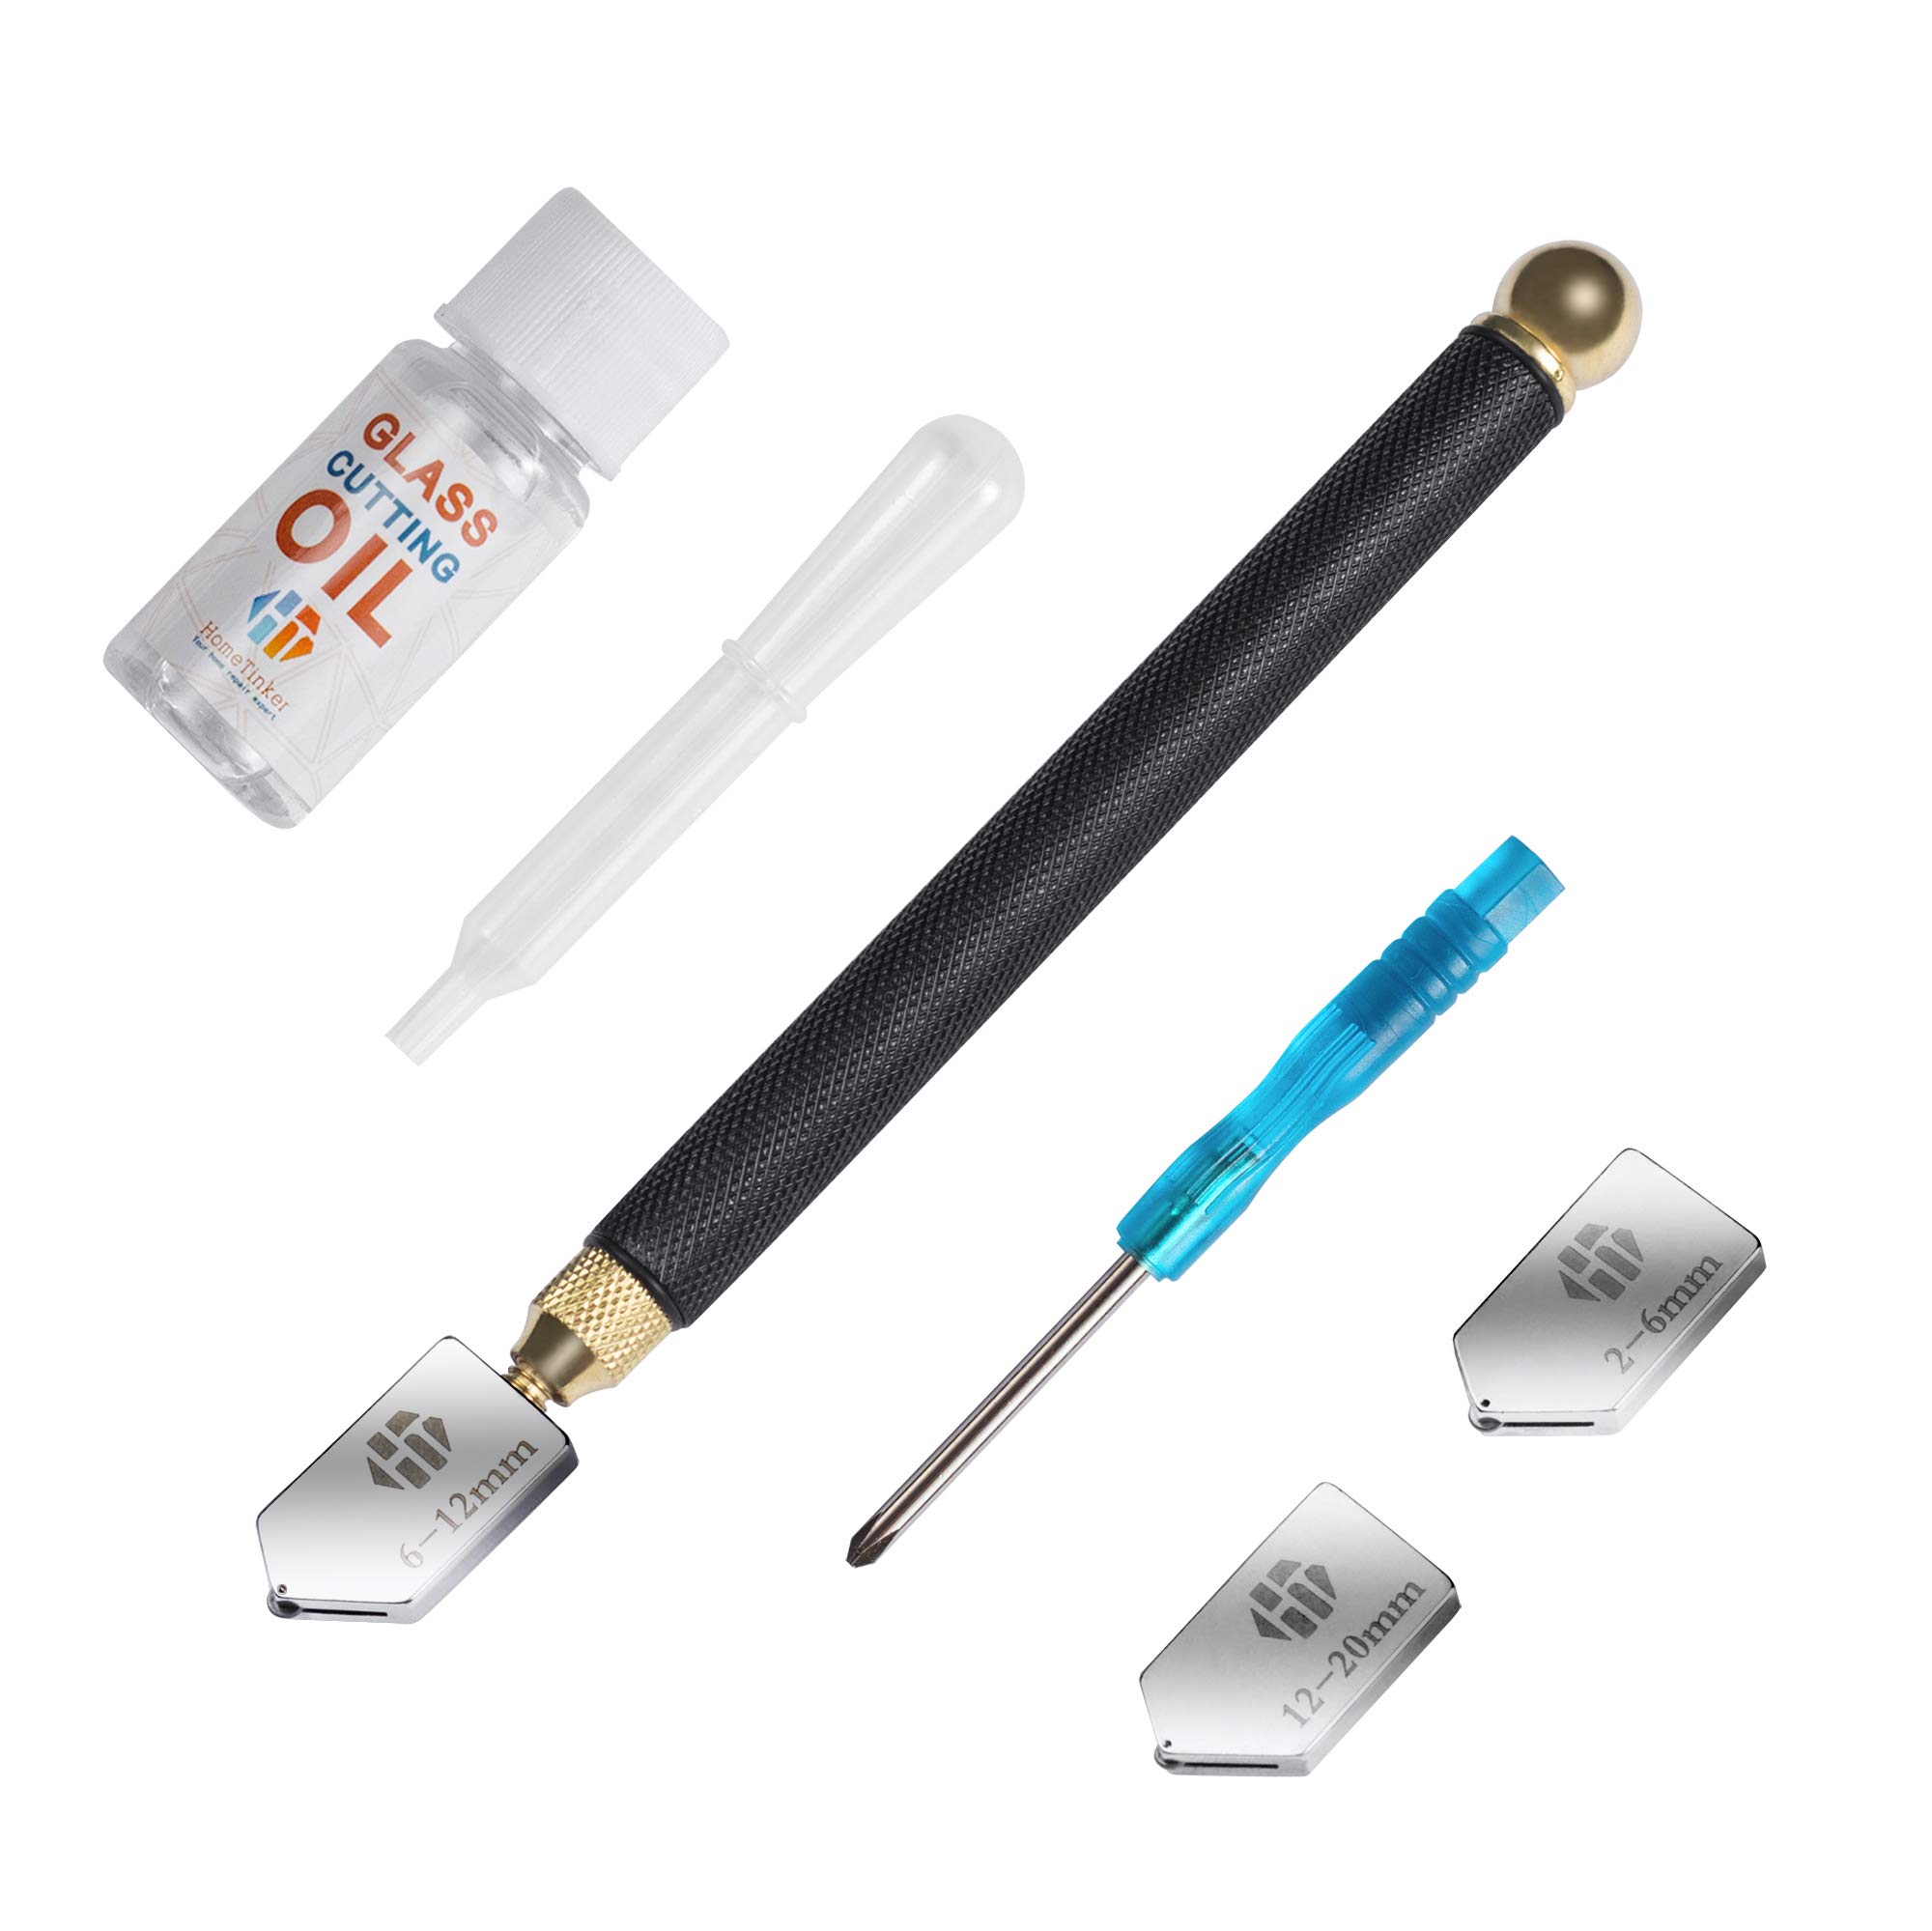 Home Pro Shop Glass Cutting Oil - Glass Cutter & Bottle Cutter Lubricant -  Use with Any Glass Cutter Tool for Glass Cutting - Glass Cutter Oil for  Glass Drill Bit, Mirror